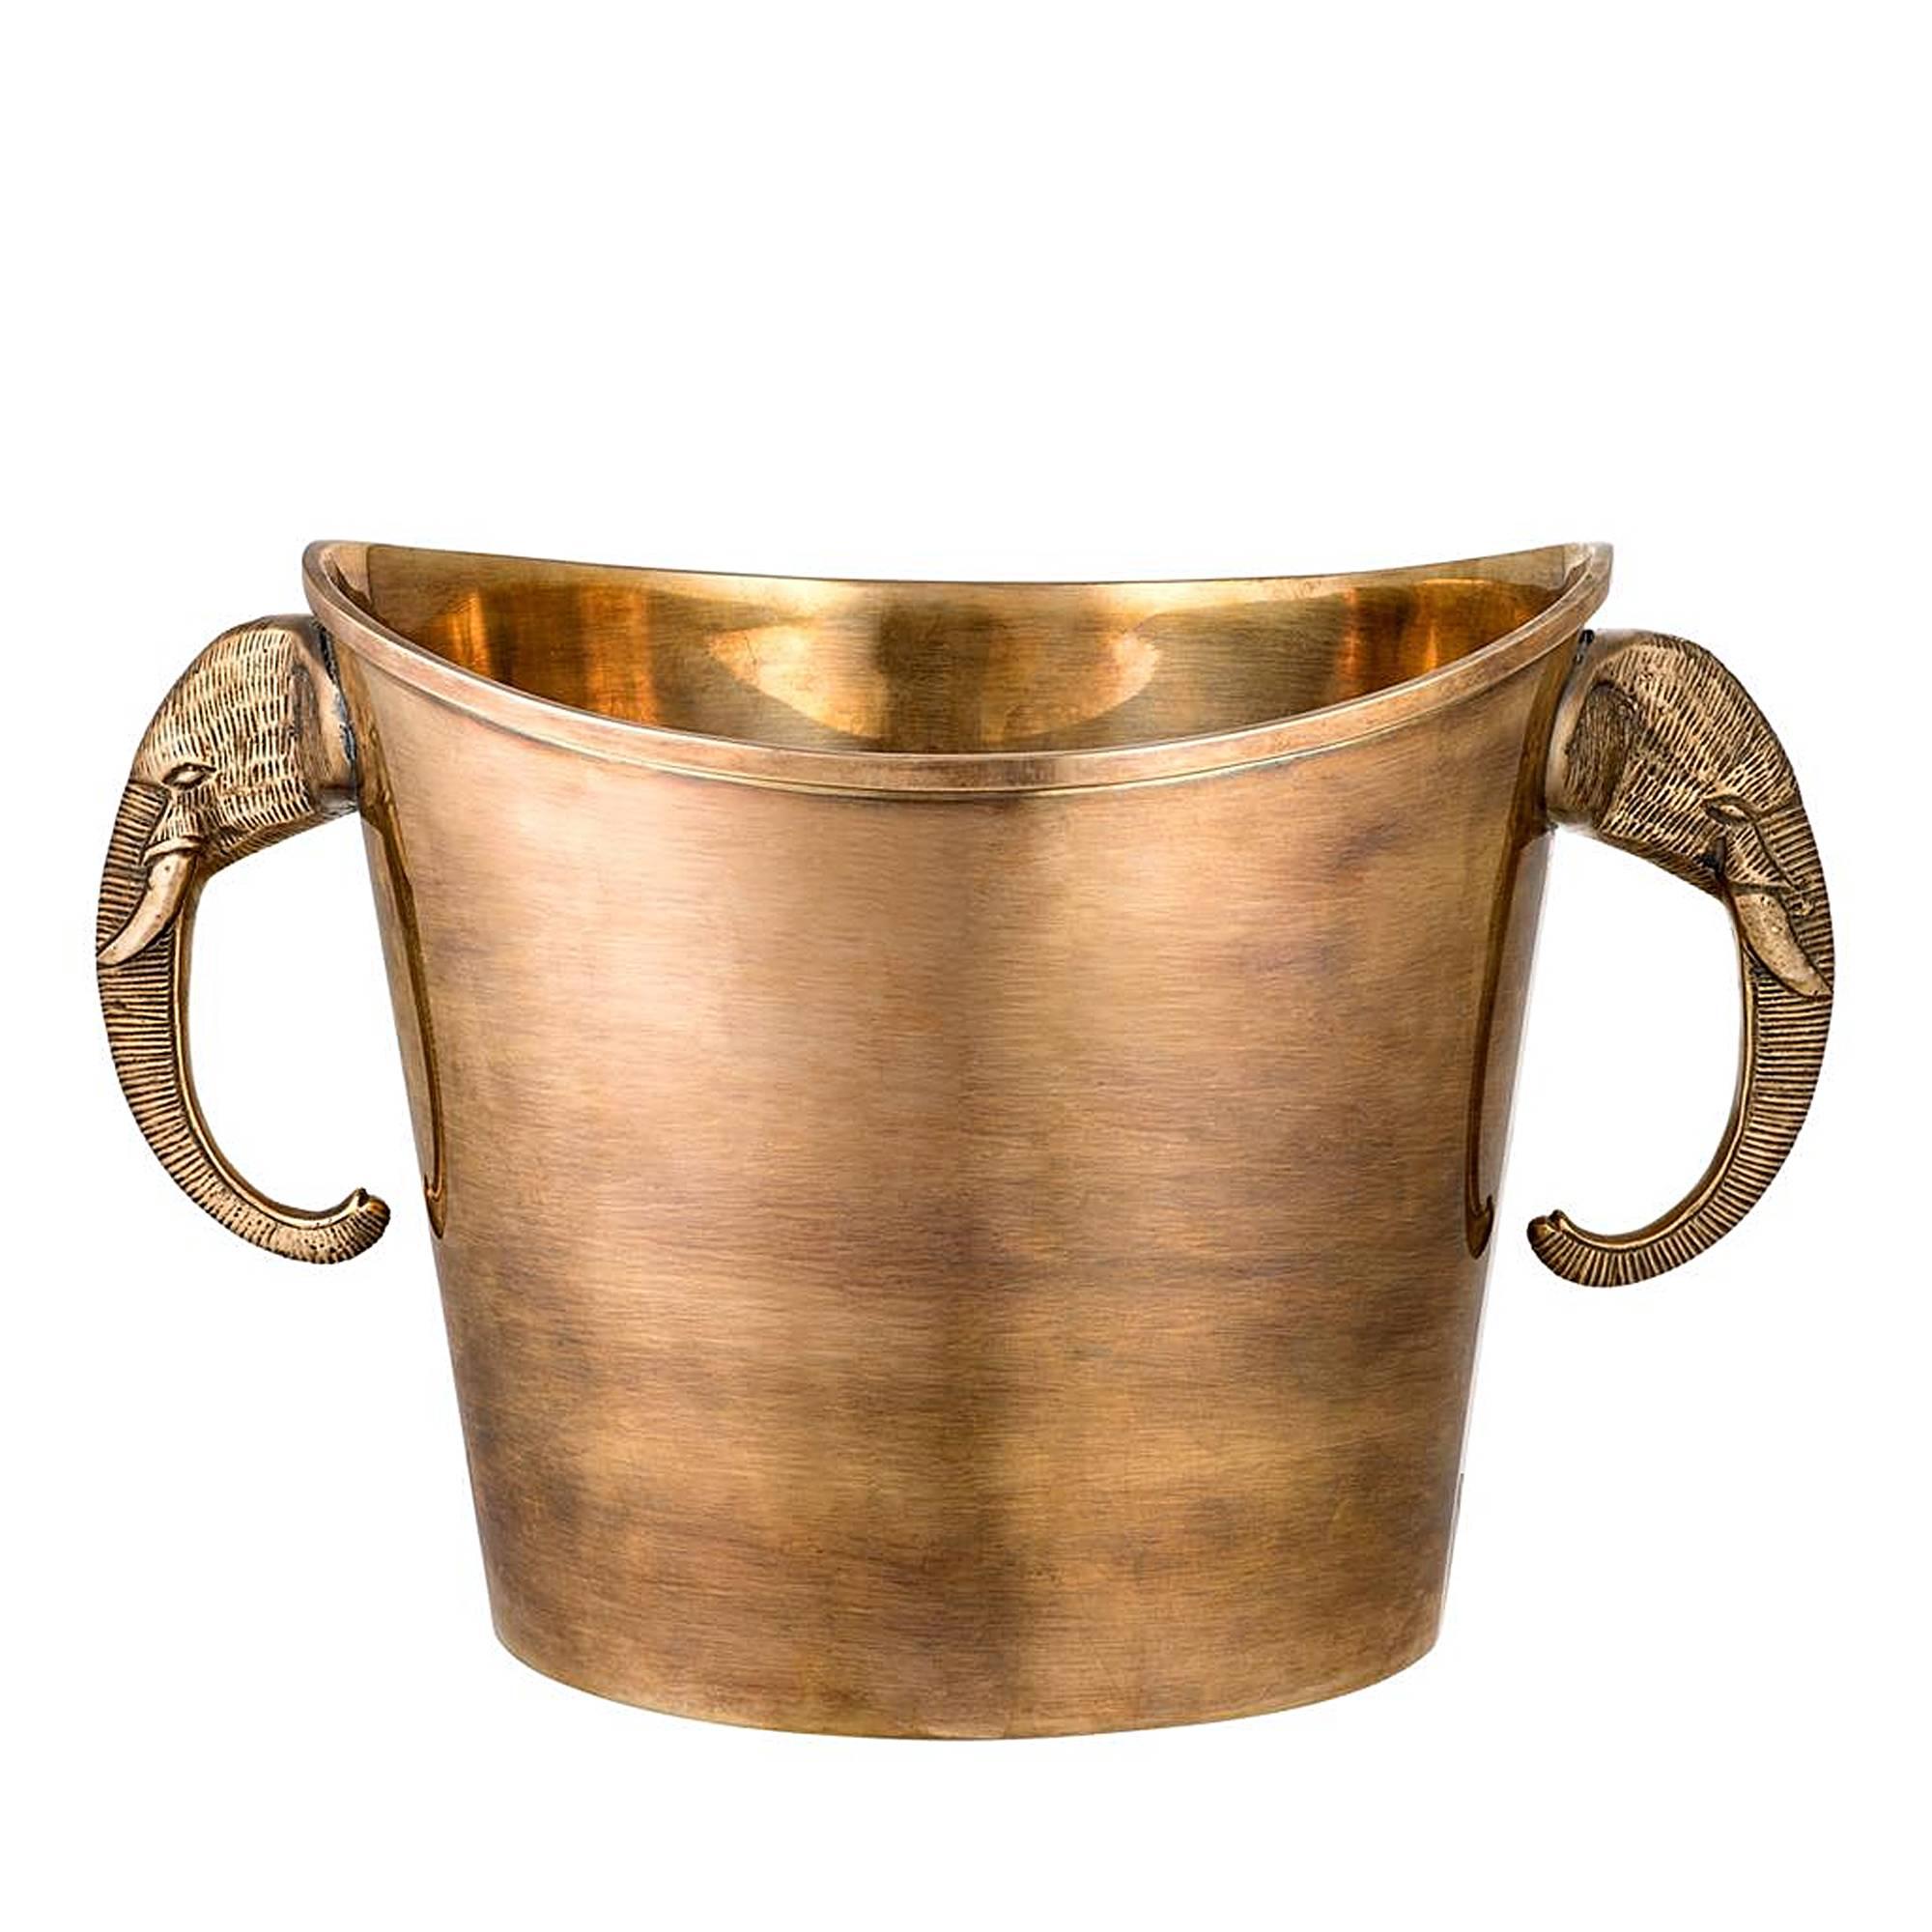 India Classic Wine Cooler in Vintage Brass or Nickel Finish